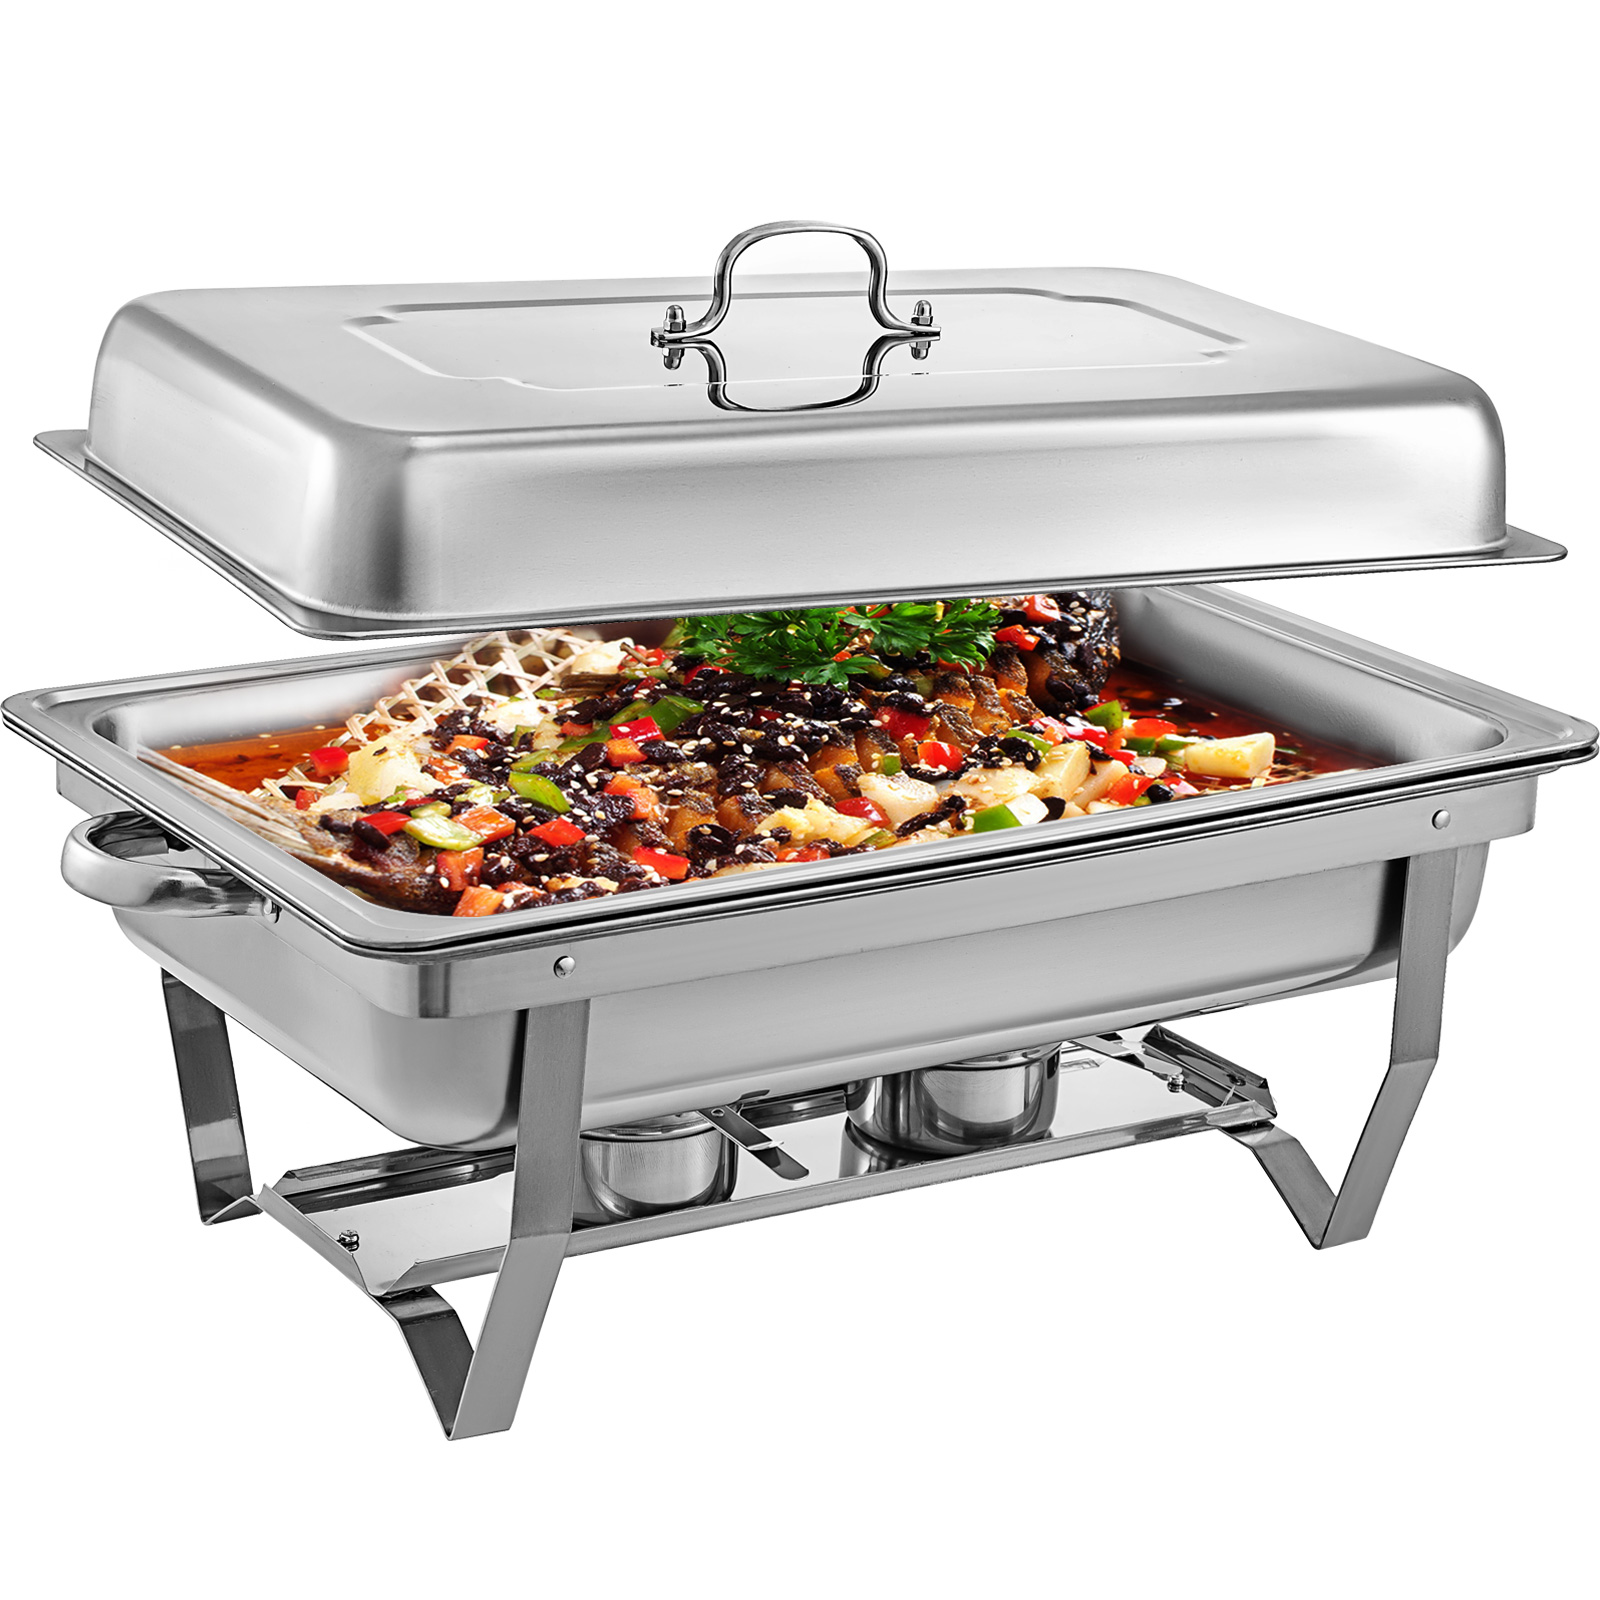 Full Size Catering Stainless Steel Chafer Chafing Dish Qt